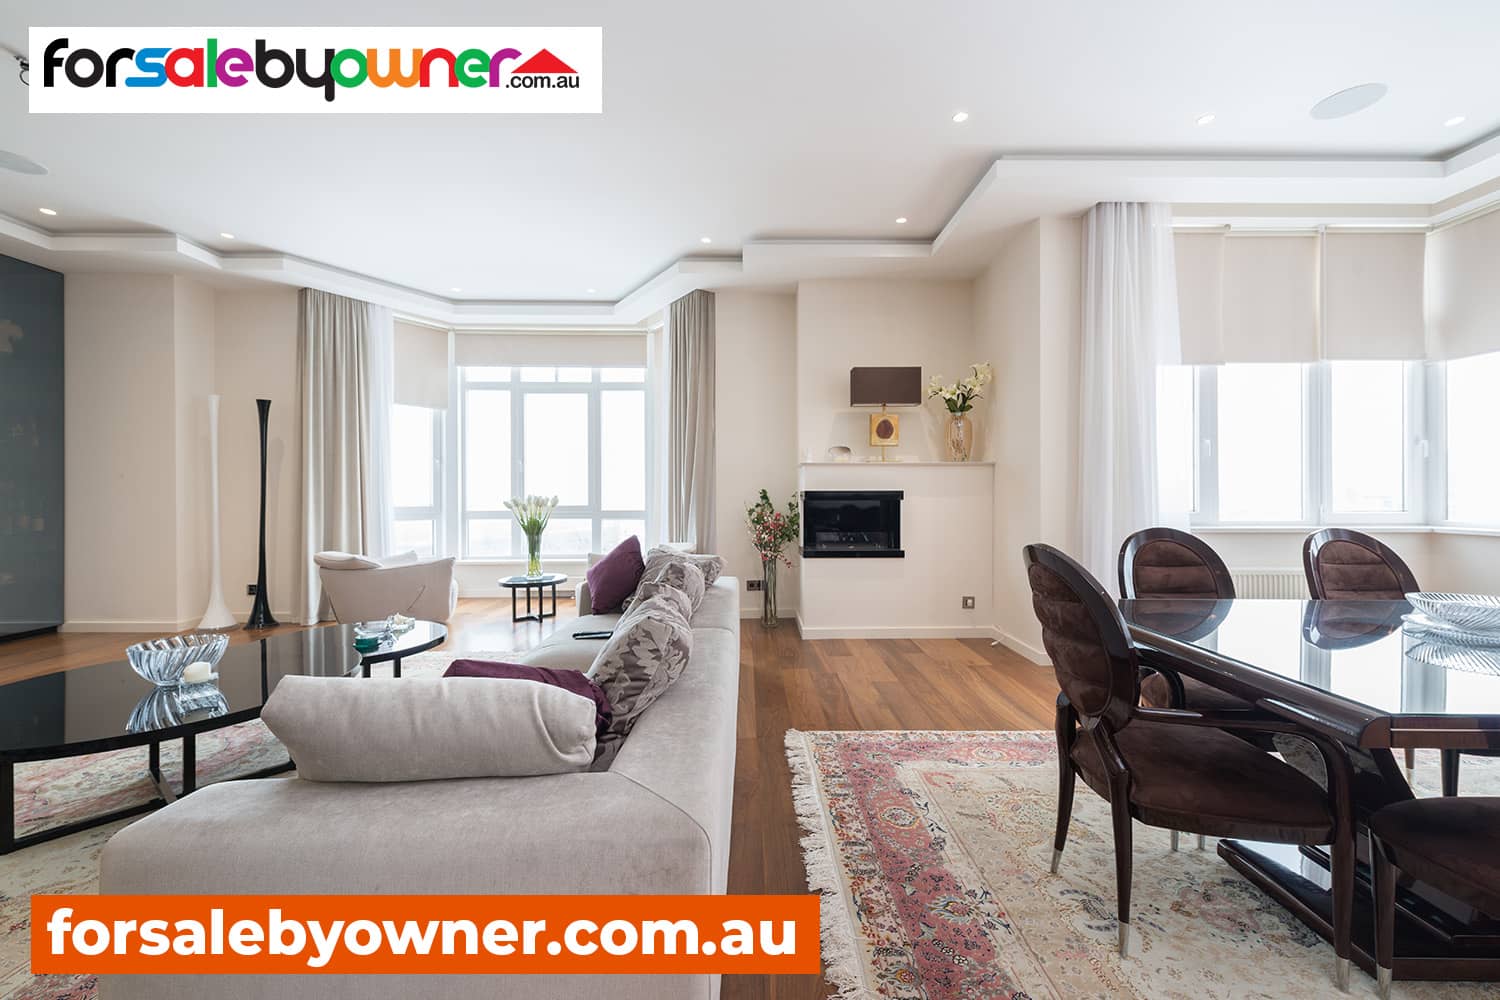 For Sale By Owner SA | Sell My House South Australia